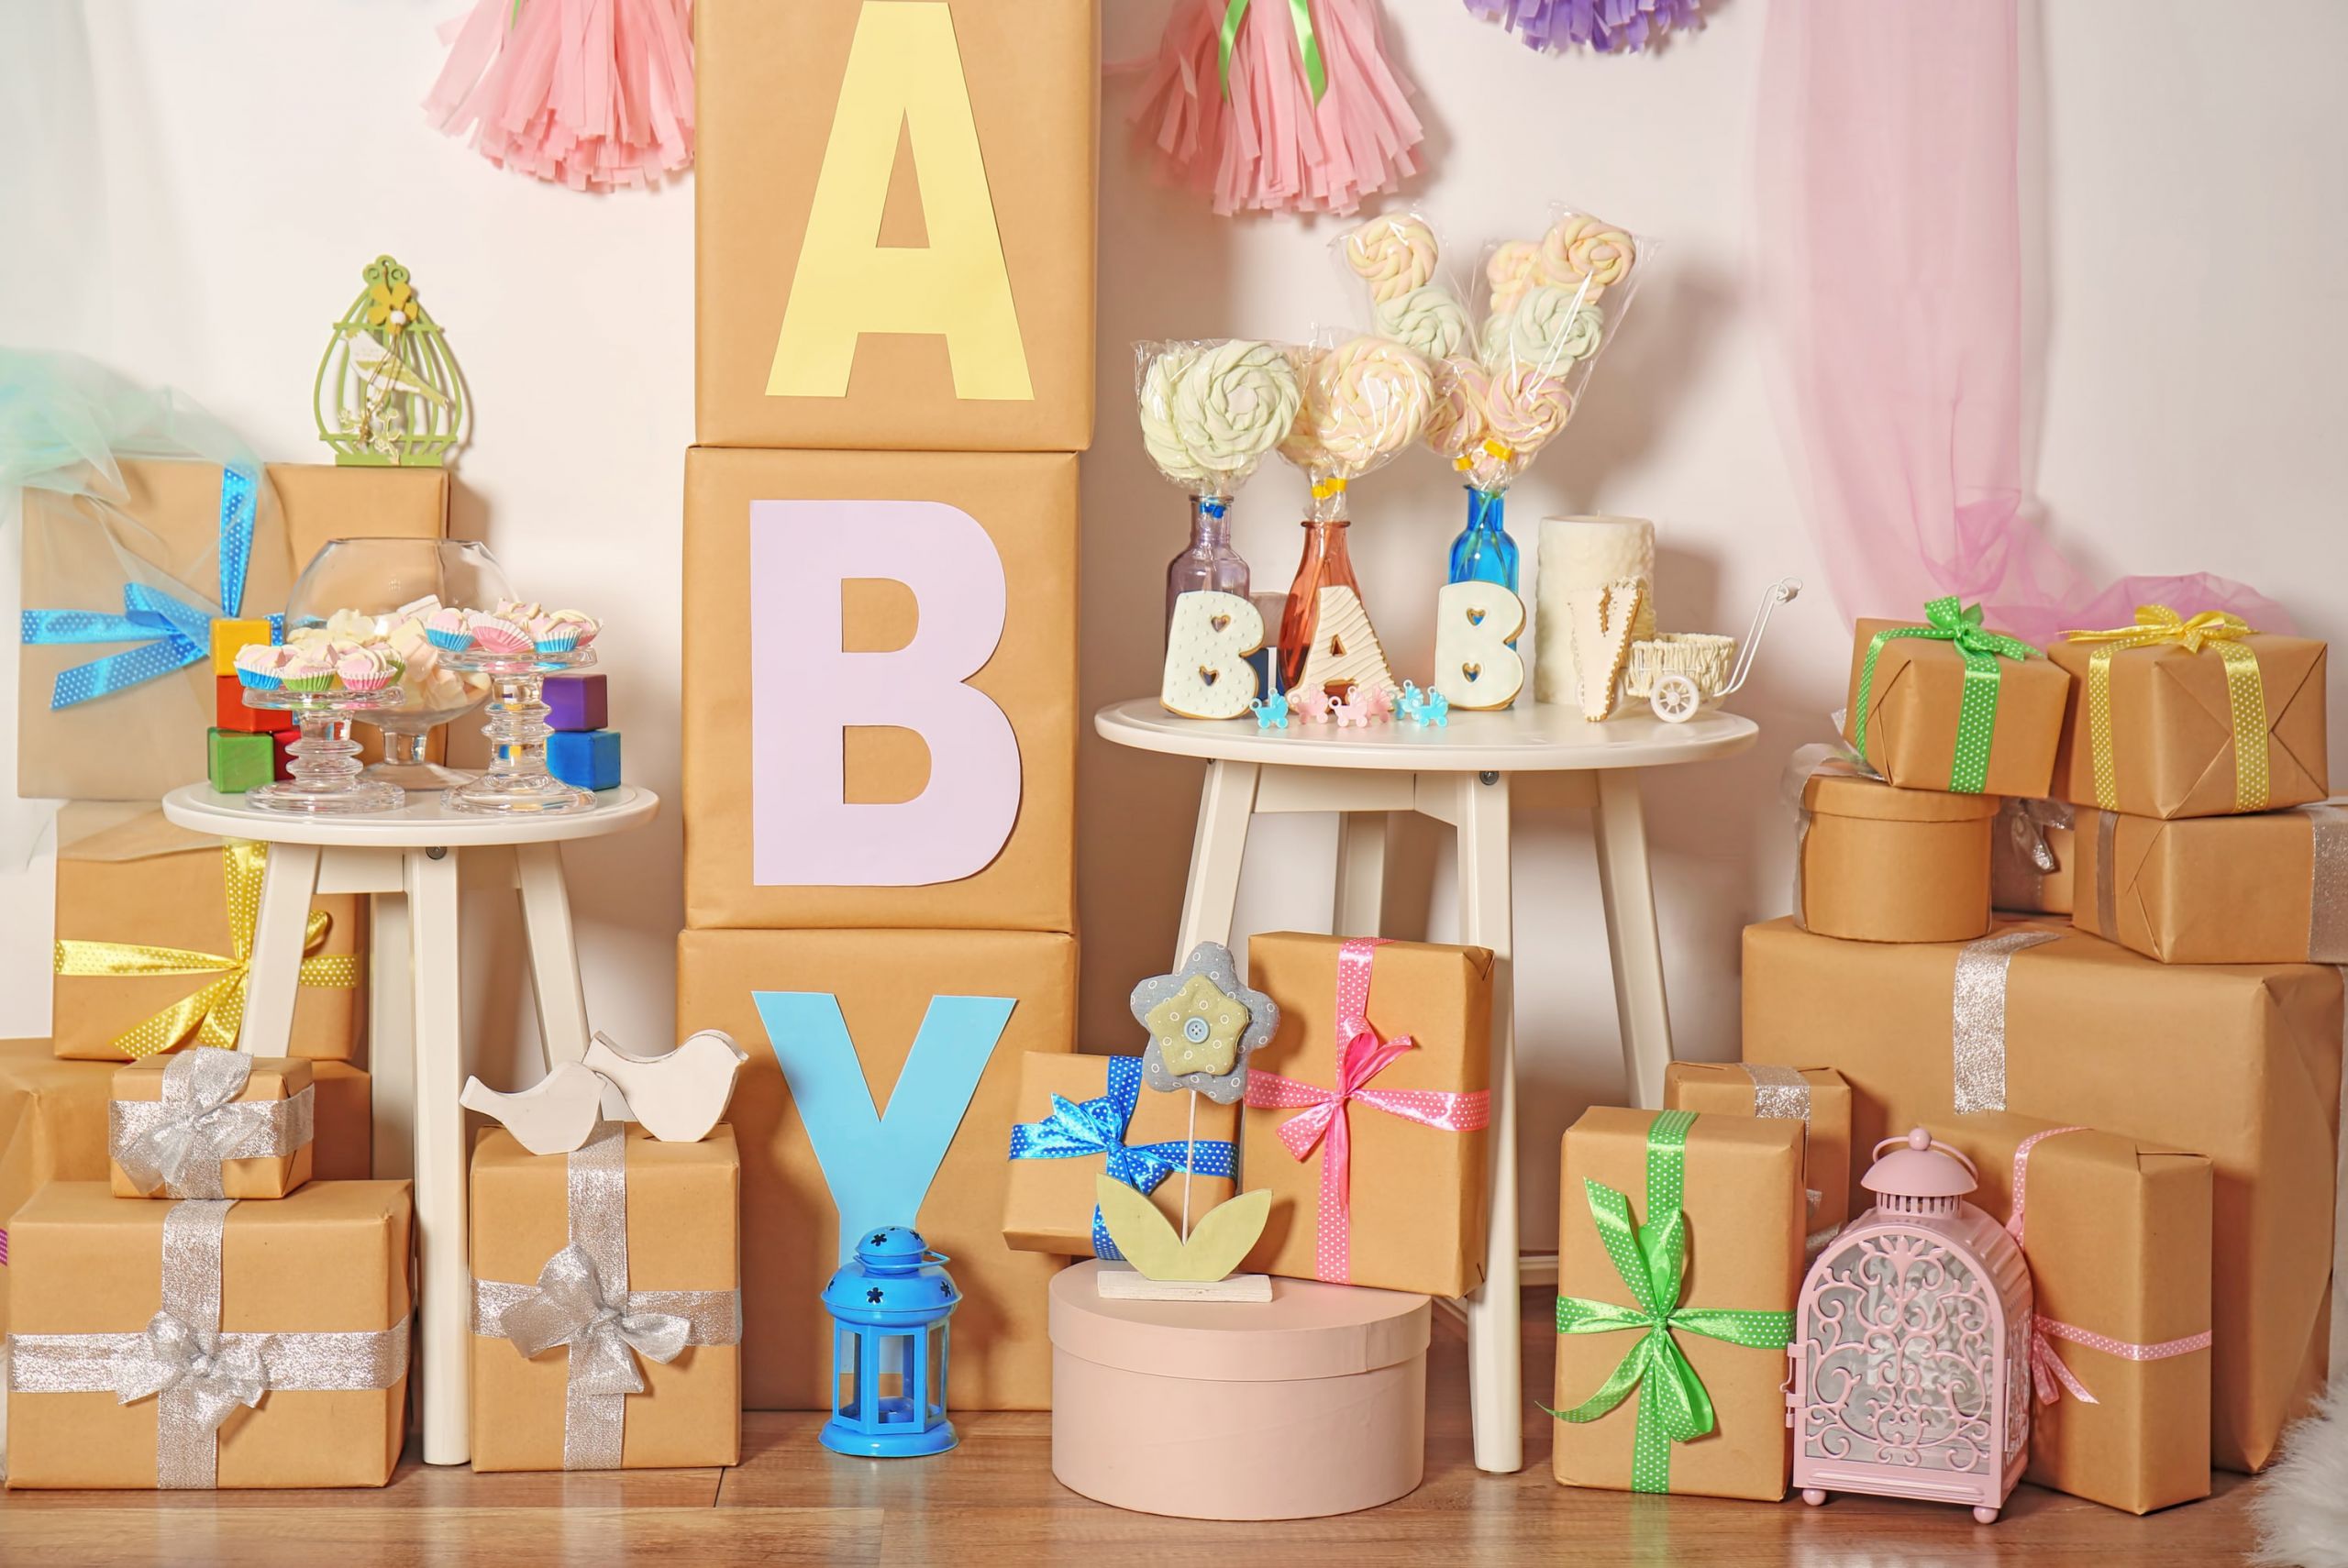 Baby Shower Decoration Ideas On A Budget
 5 Cheap & Unique Baby Shower Decoration Ideas